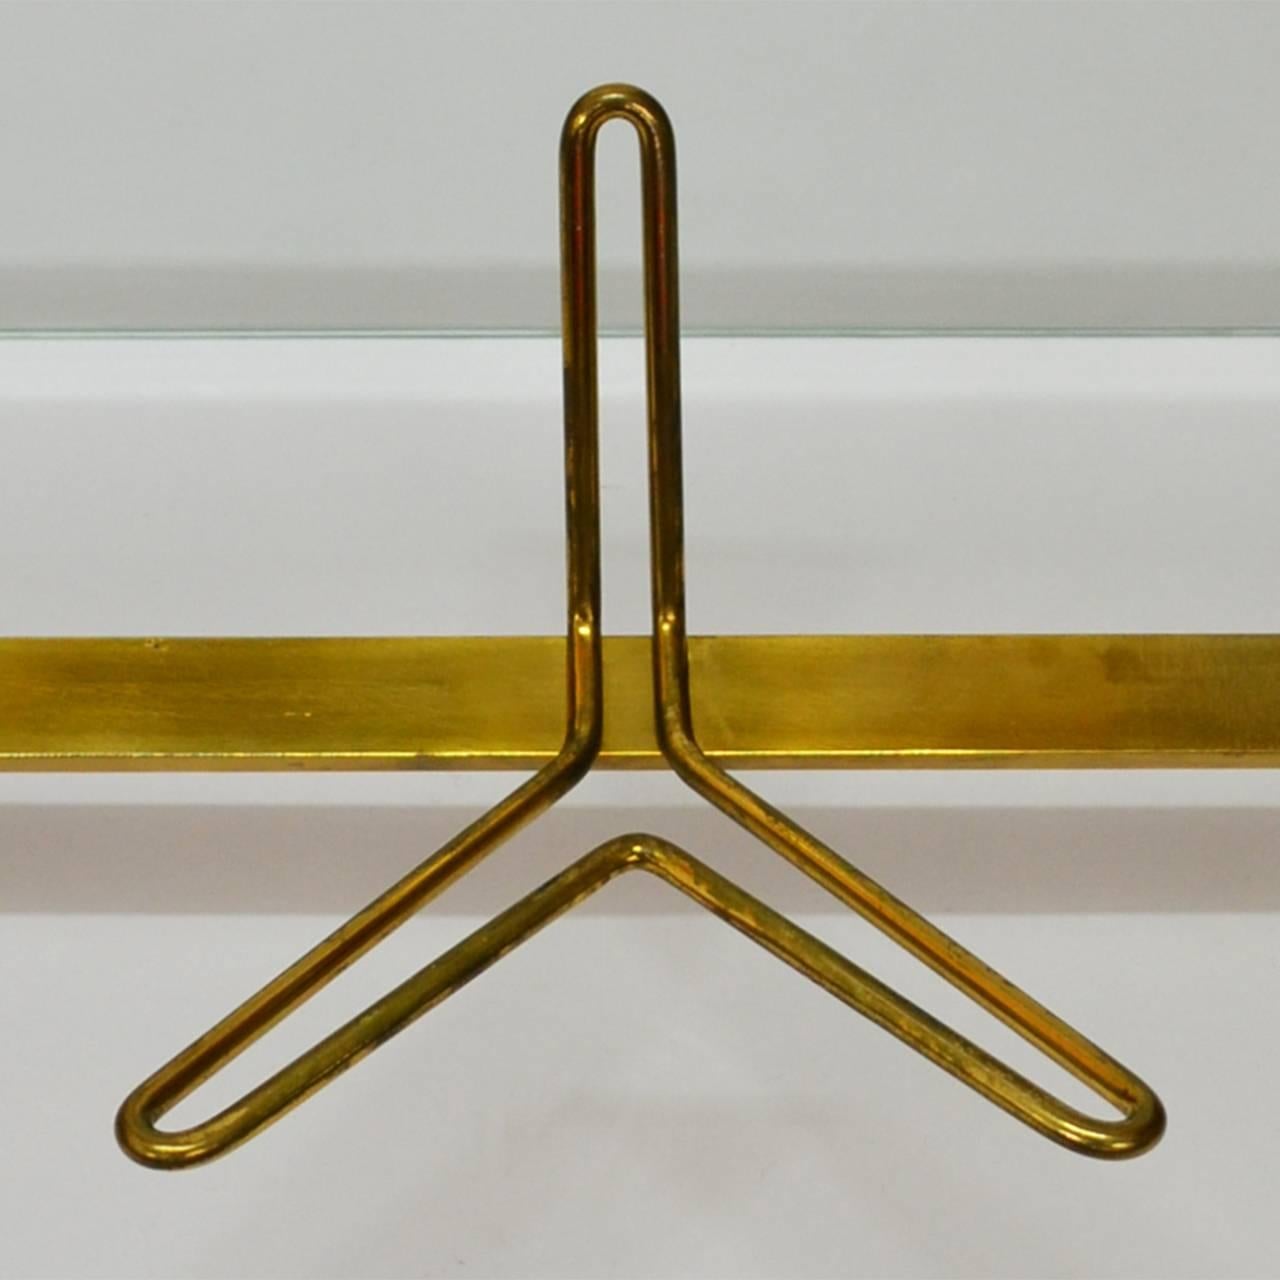 1950s wall-mounted coat hooks, wood support, brass, glass shelf on top.
Good original condition.